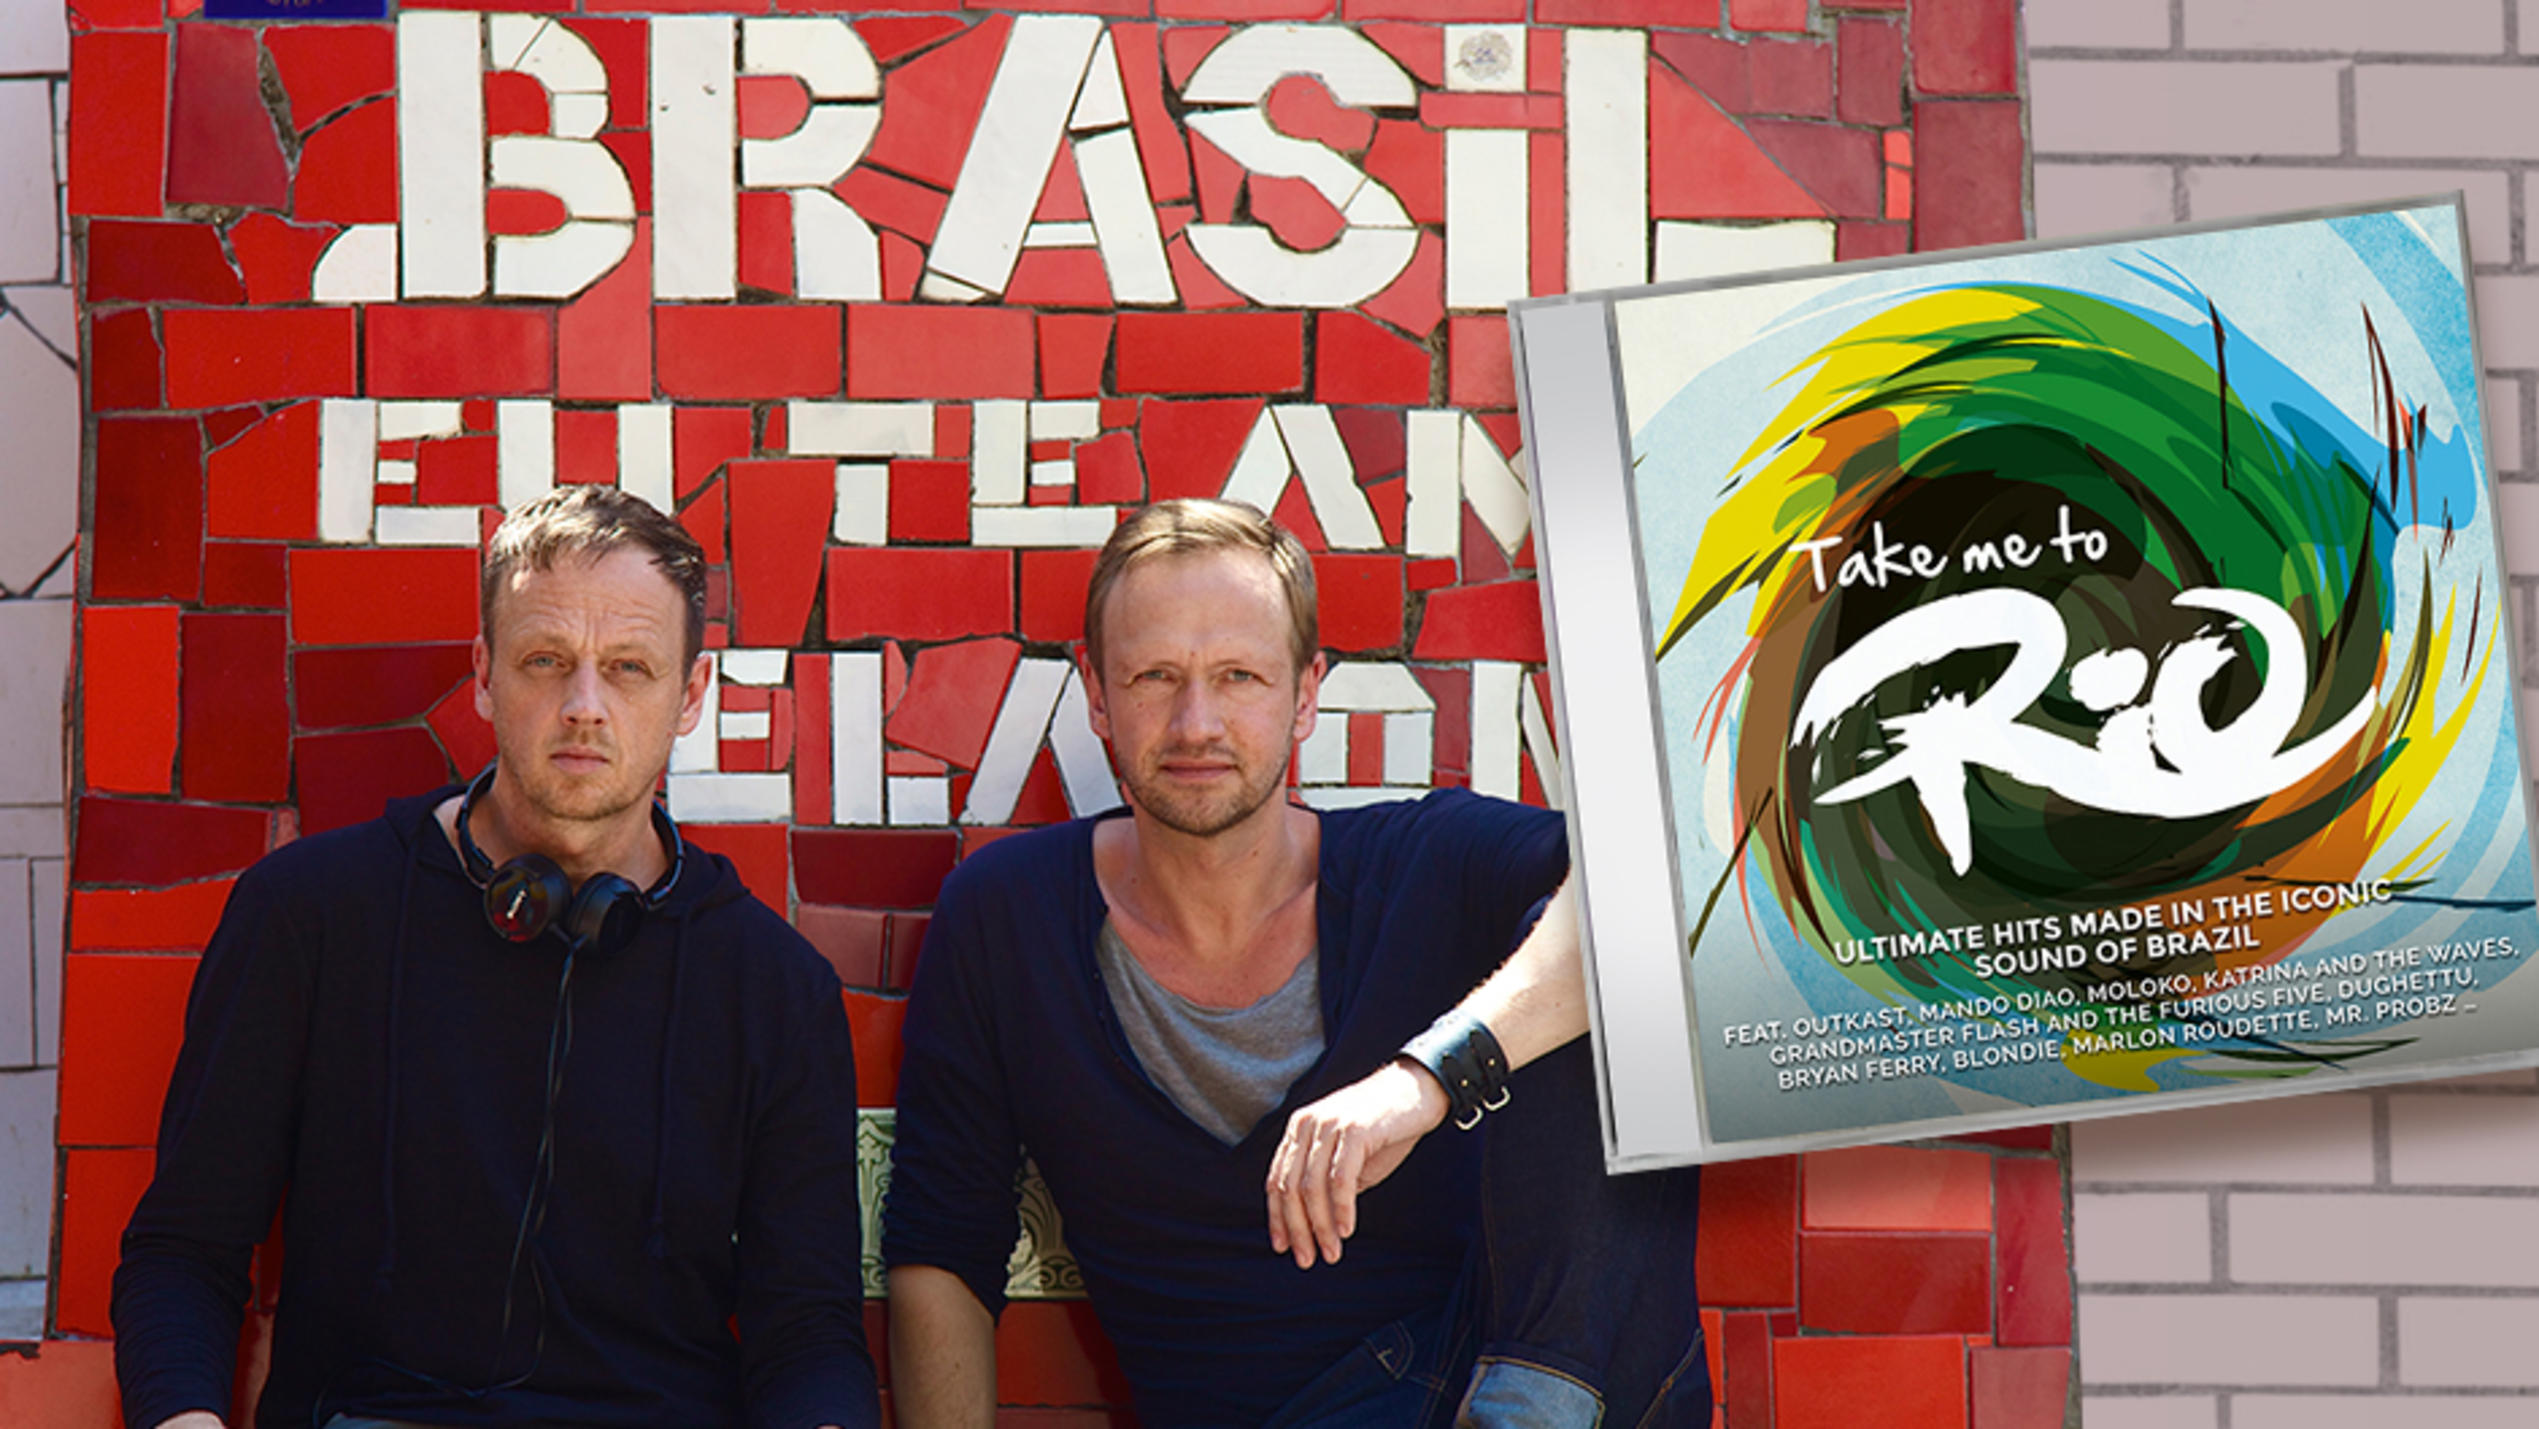 Die Berman Brothers mit Take me to Rio - Ultimate Hits Made In The Iconic Sound Of Brazil